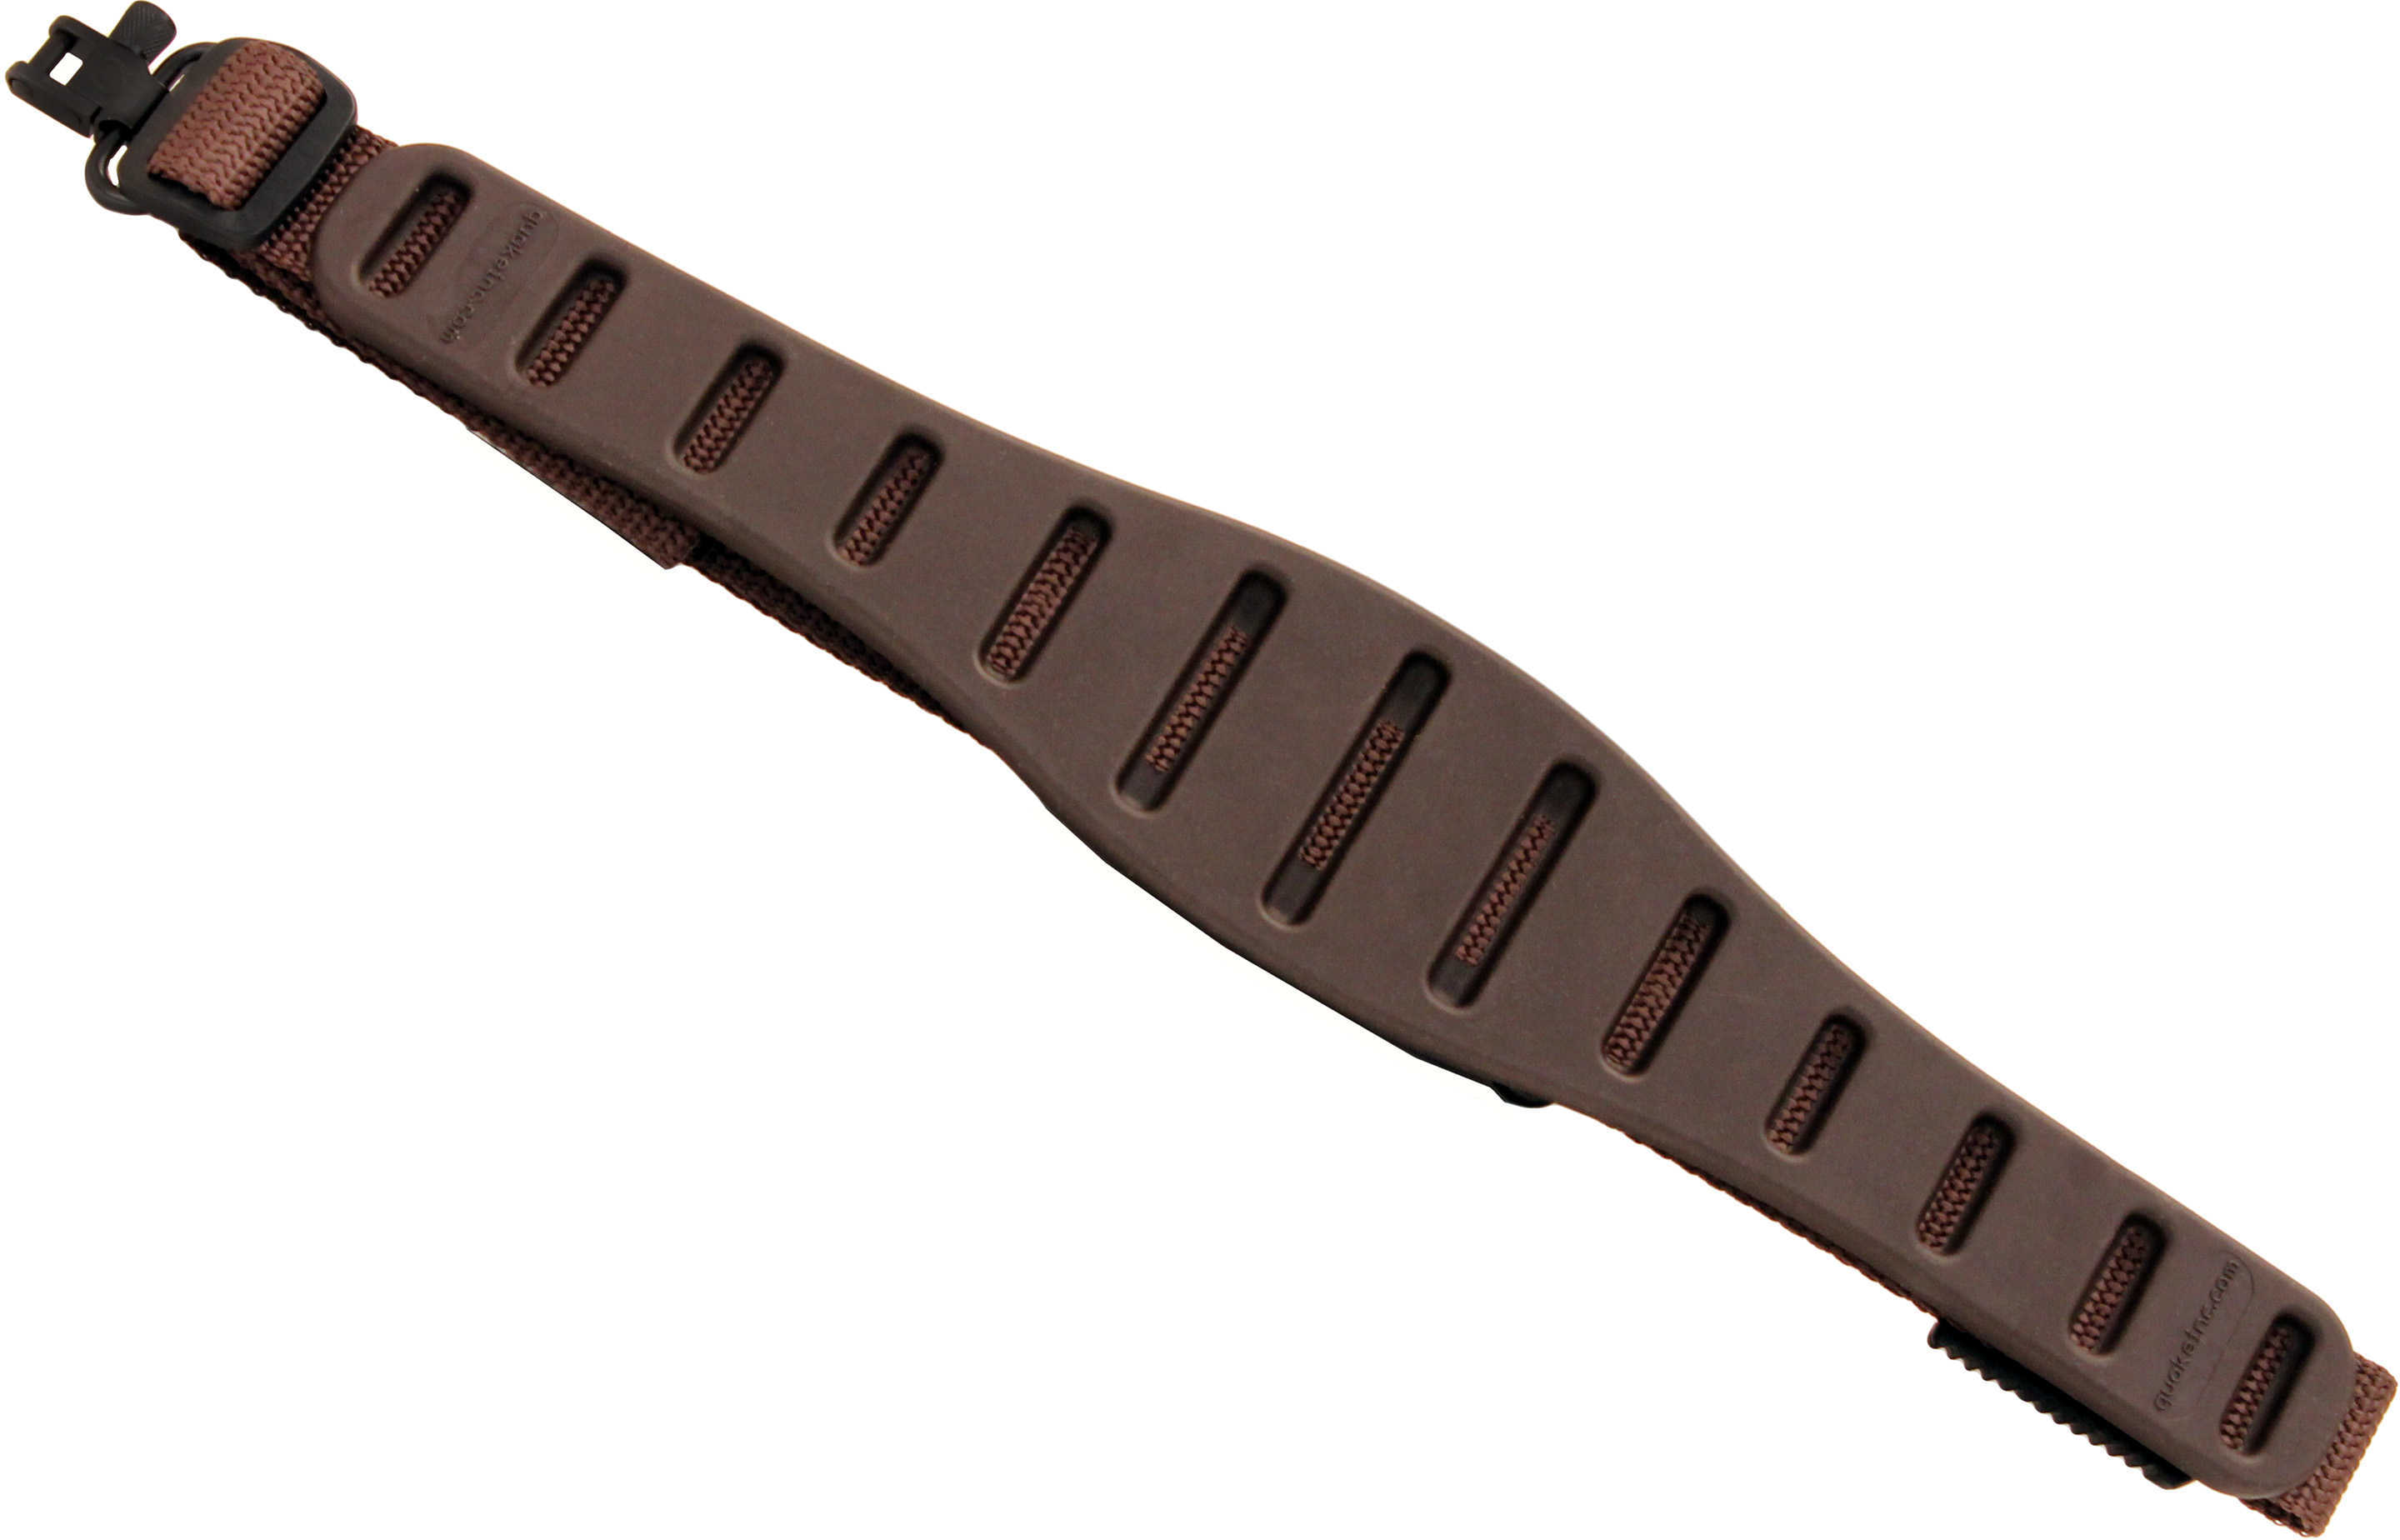 Claw Contour Rifle Sling Brown Md: 53006-0